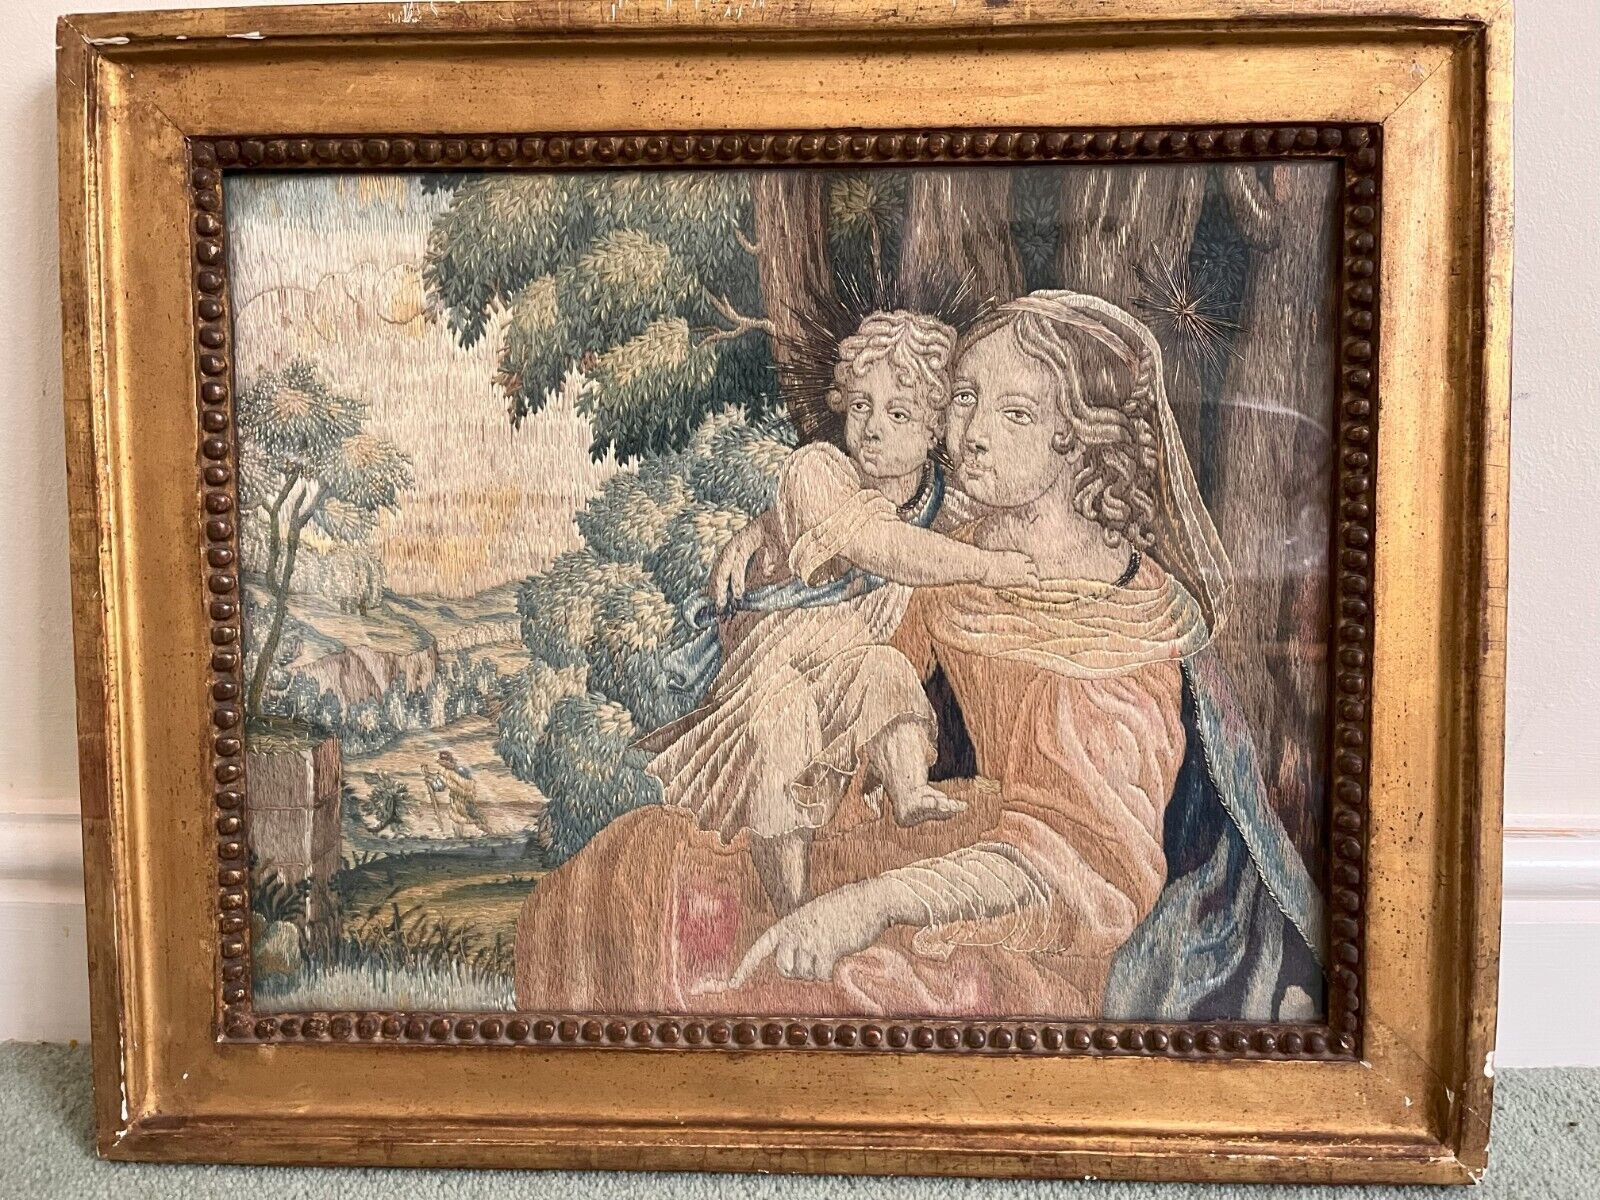 Antique Embroidery – Mother and Child